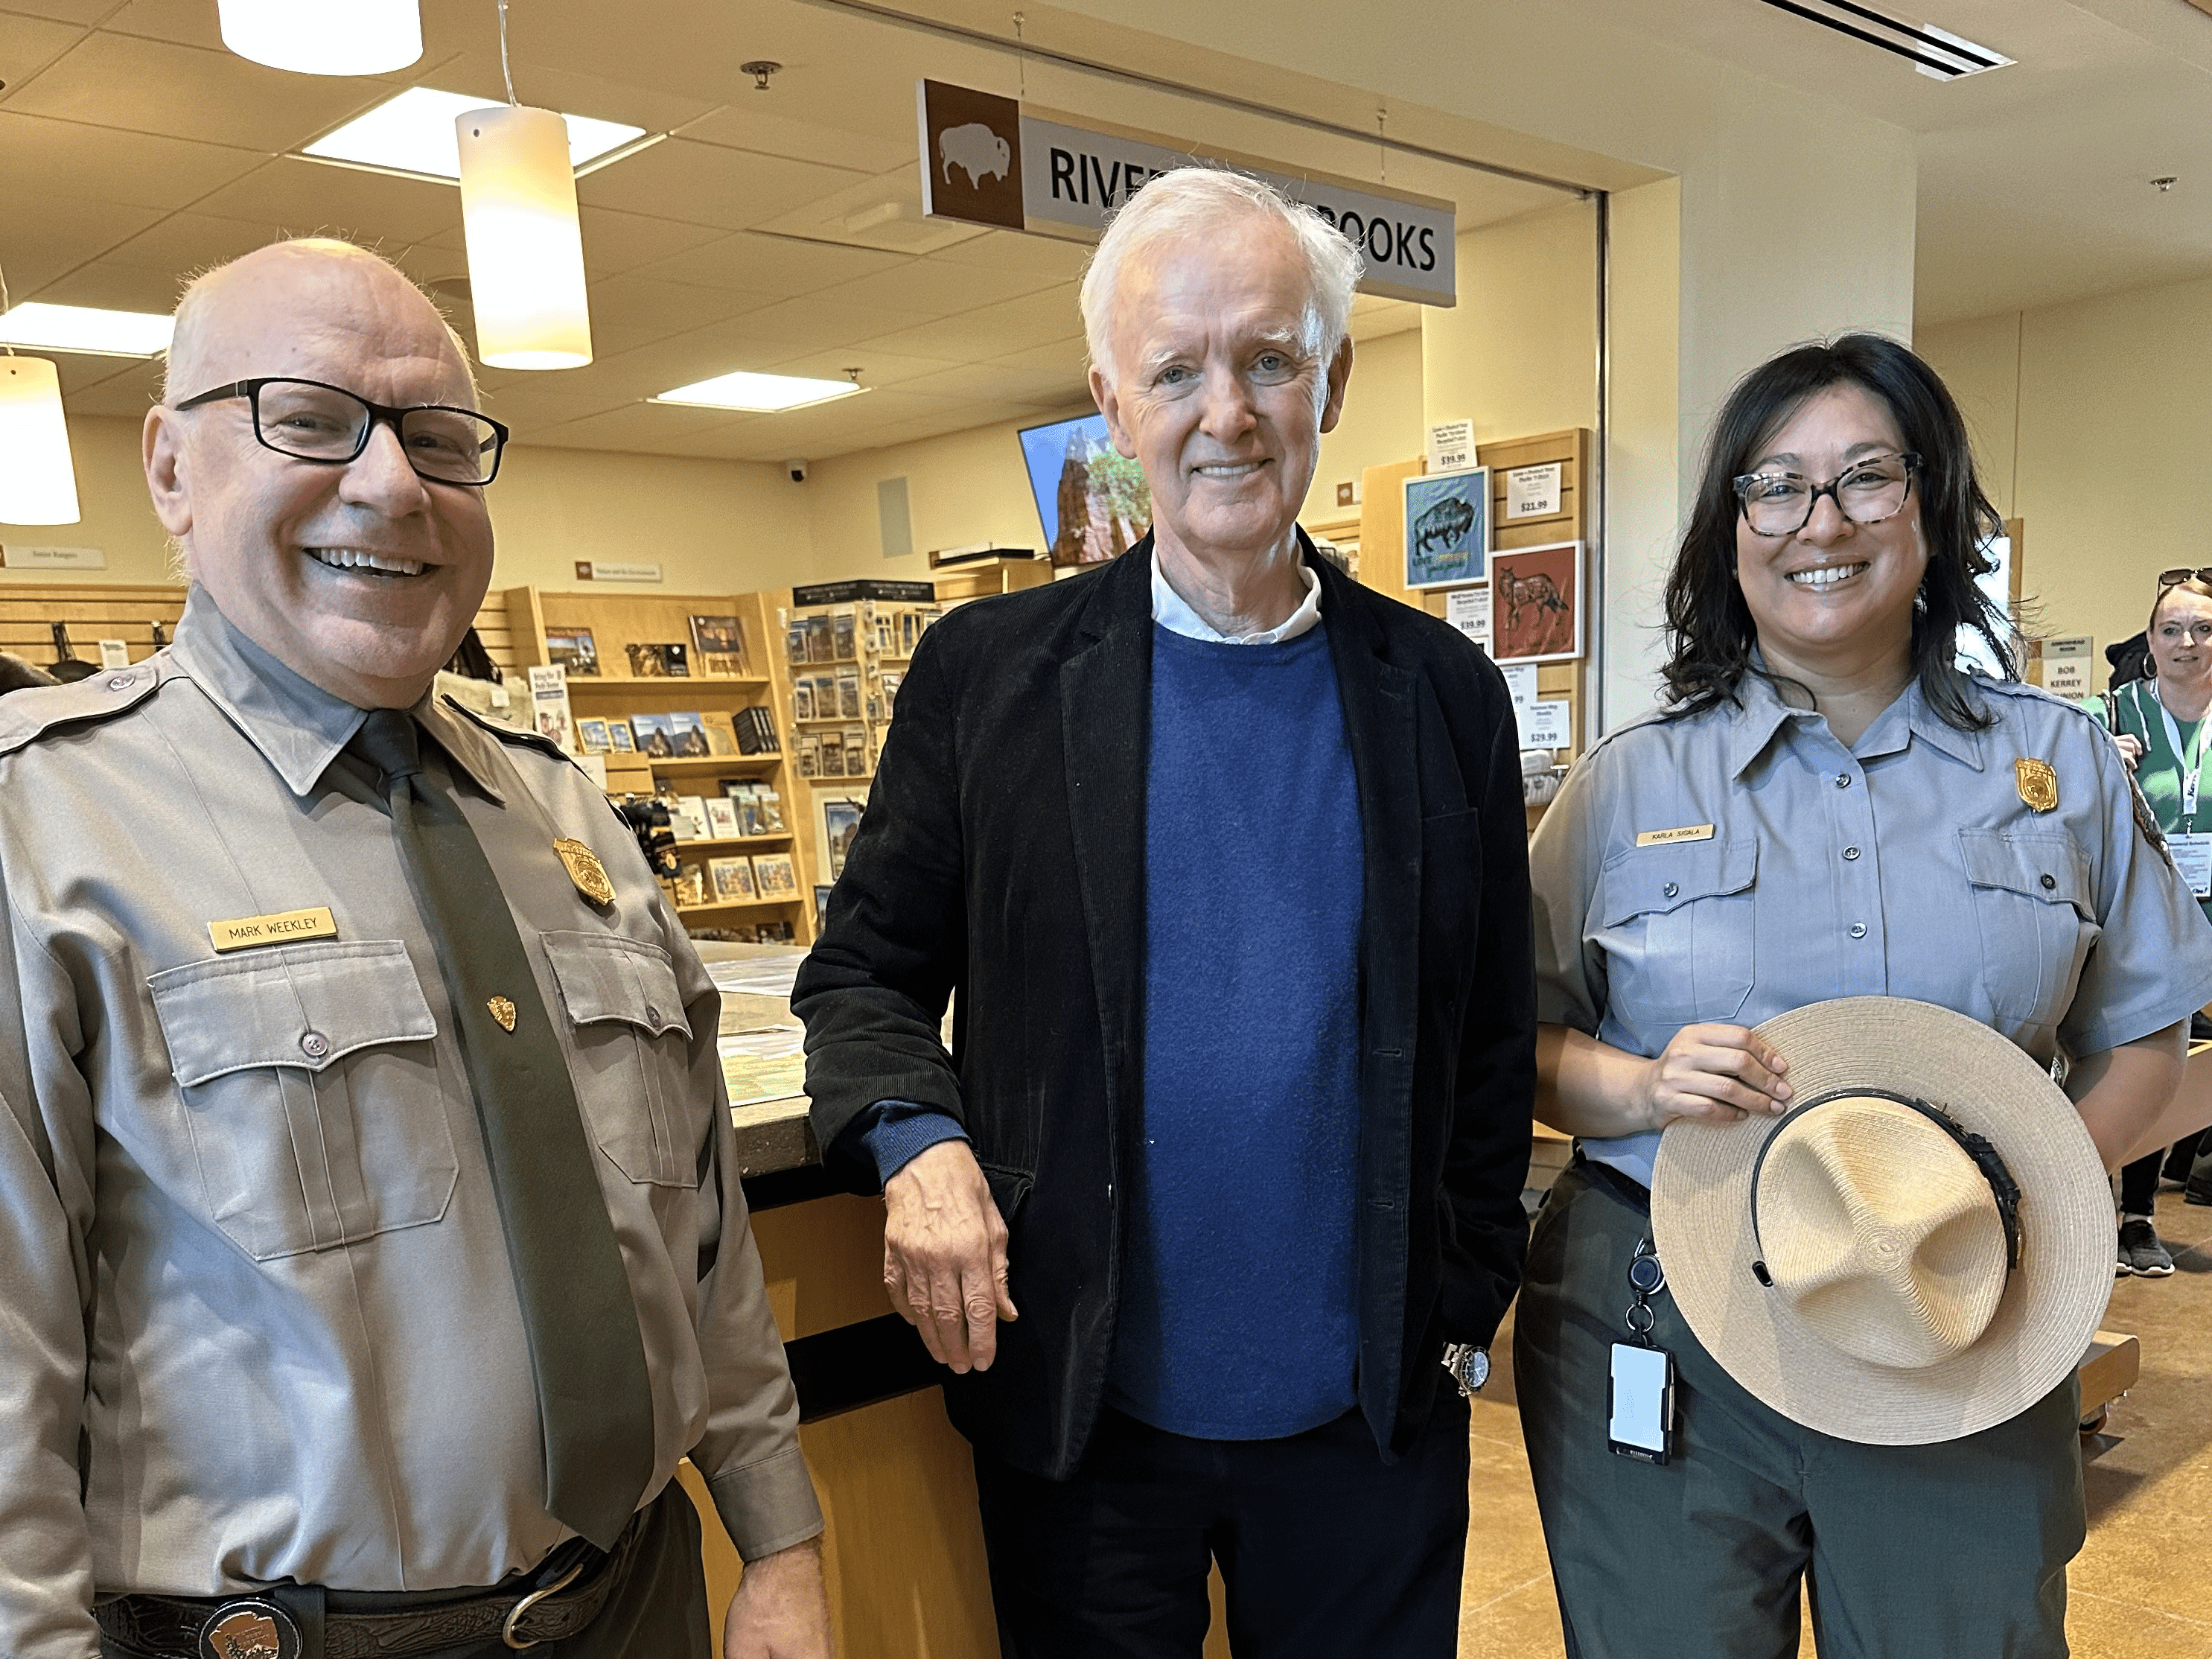 Two people in park ranger uniforms pose with a man in a visitors center